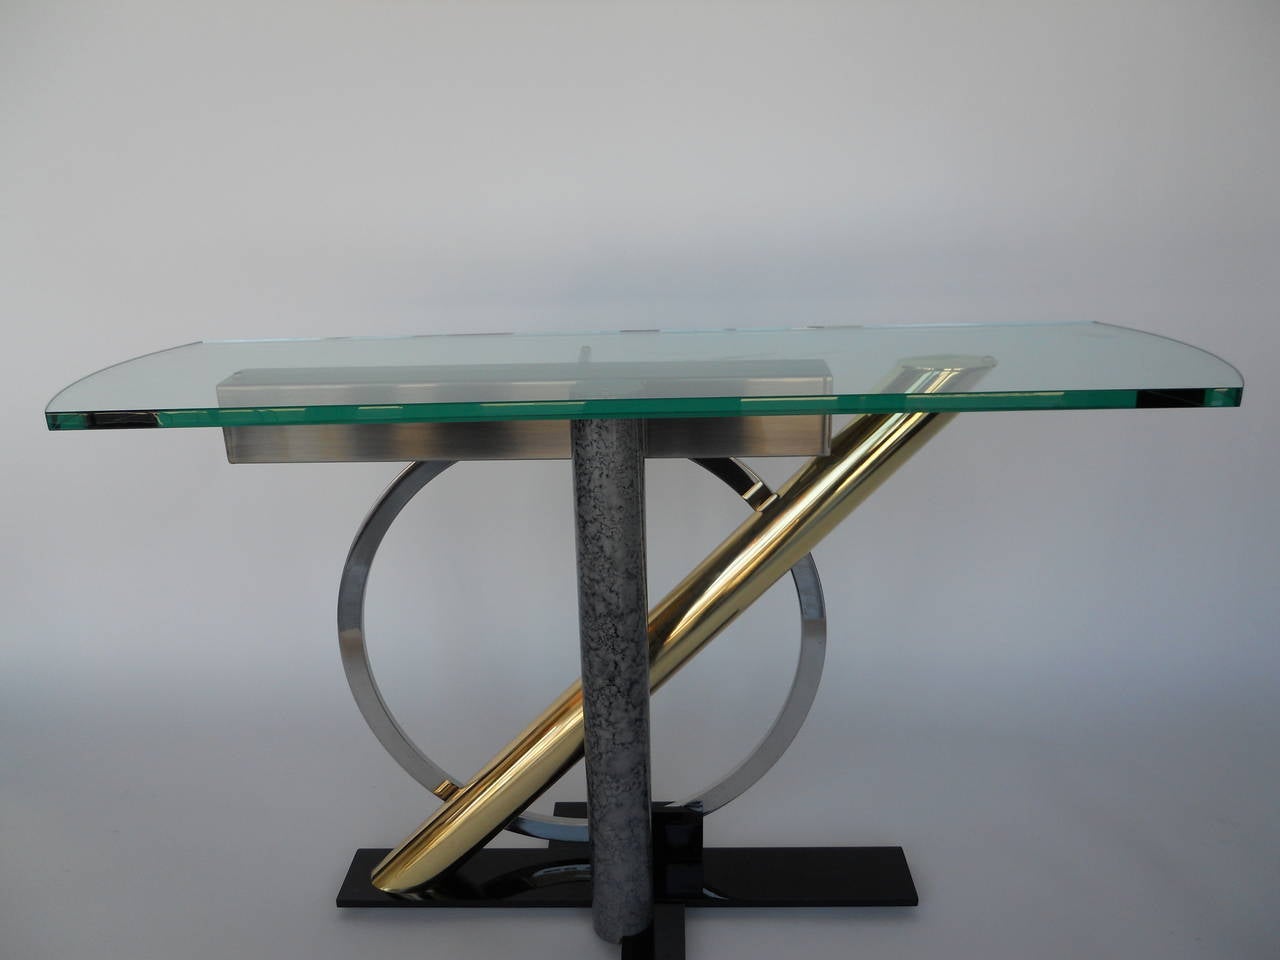 Kaizo Oto for DIA (Design Institute of America) console.
Brass, steel, painted metal, glass.